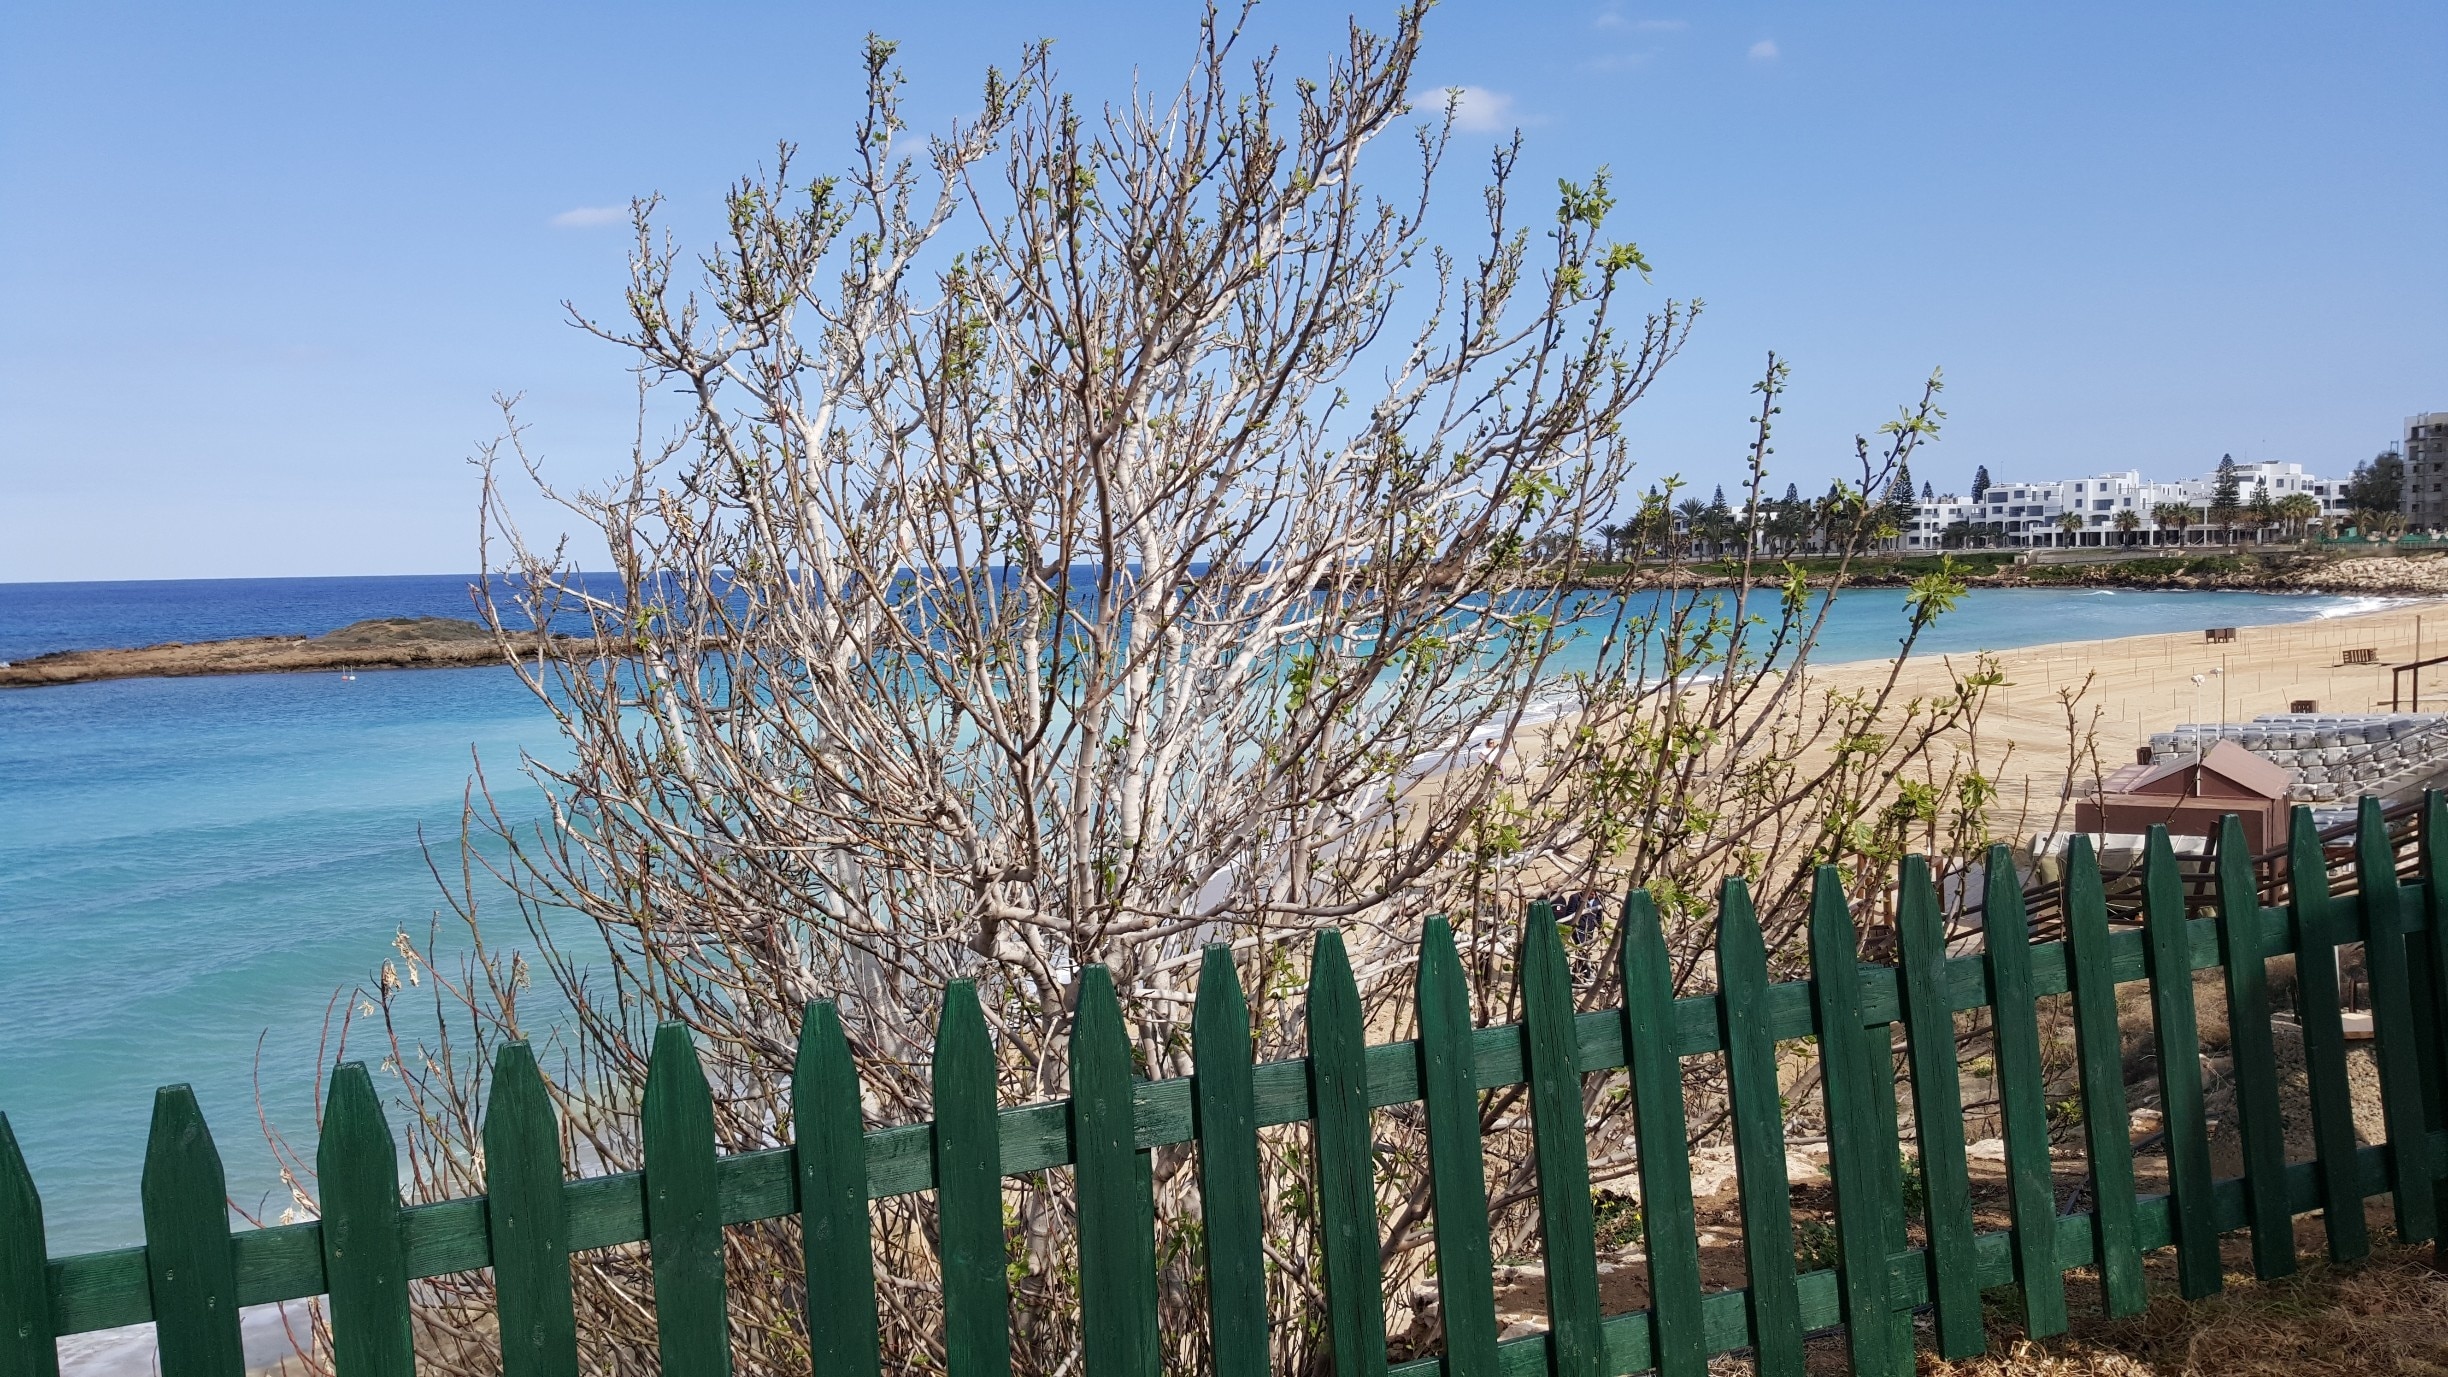 My husband and I searched everywhere for this Fig tree.  Well, we found it and the beach was stunning. 